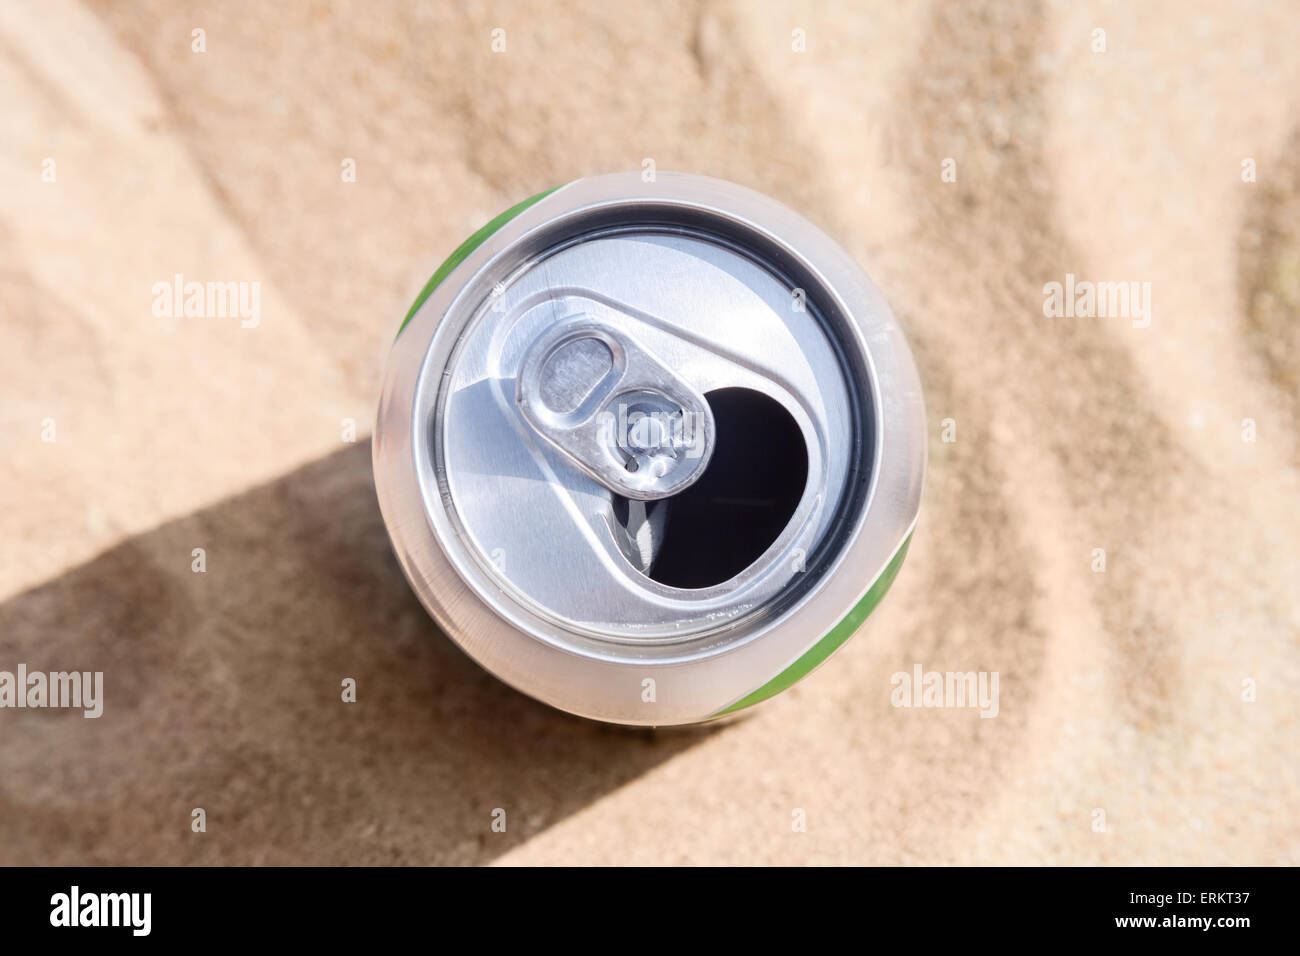 Aluminum can of beer stands on a beach sand Stock Photo